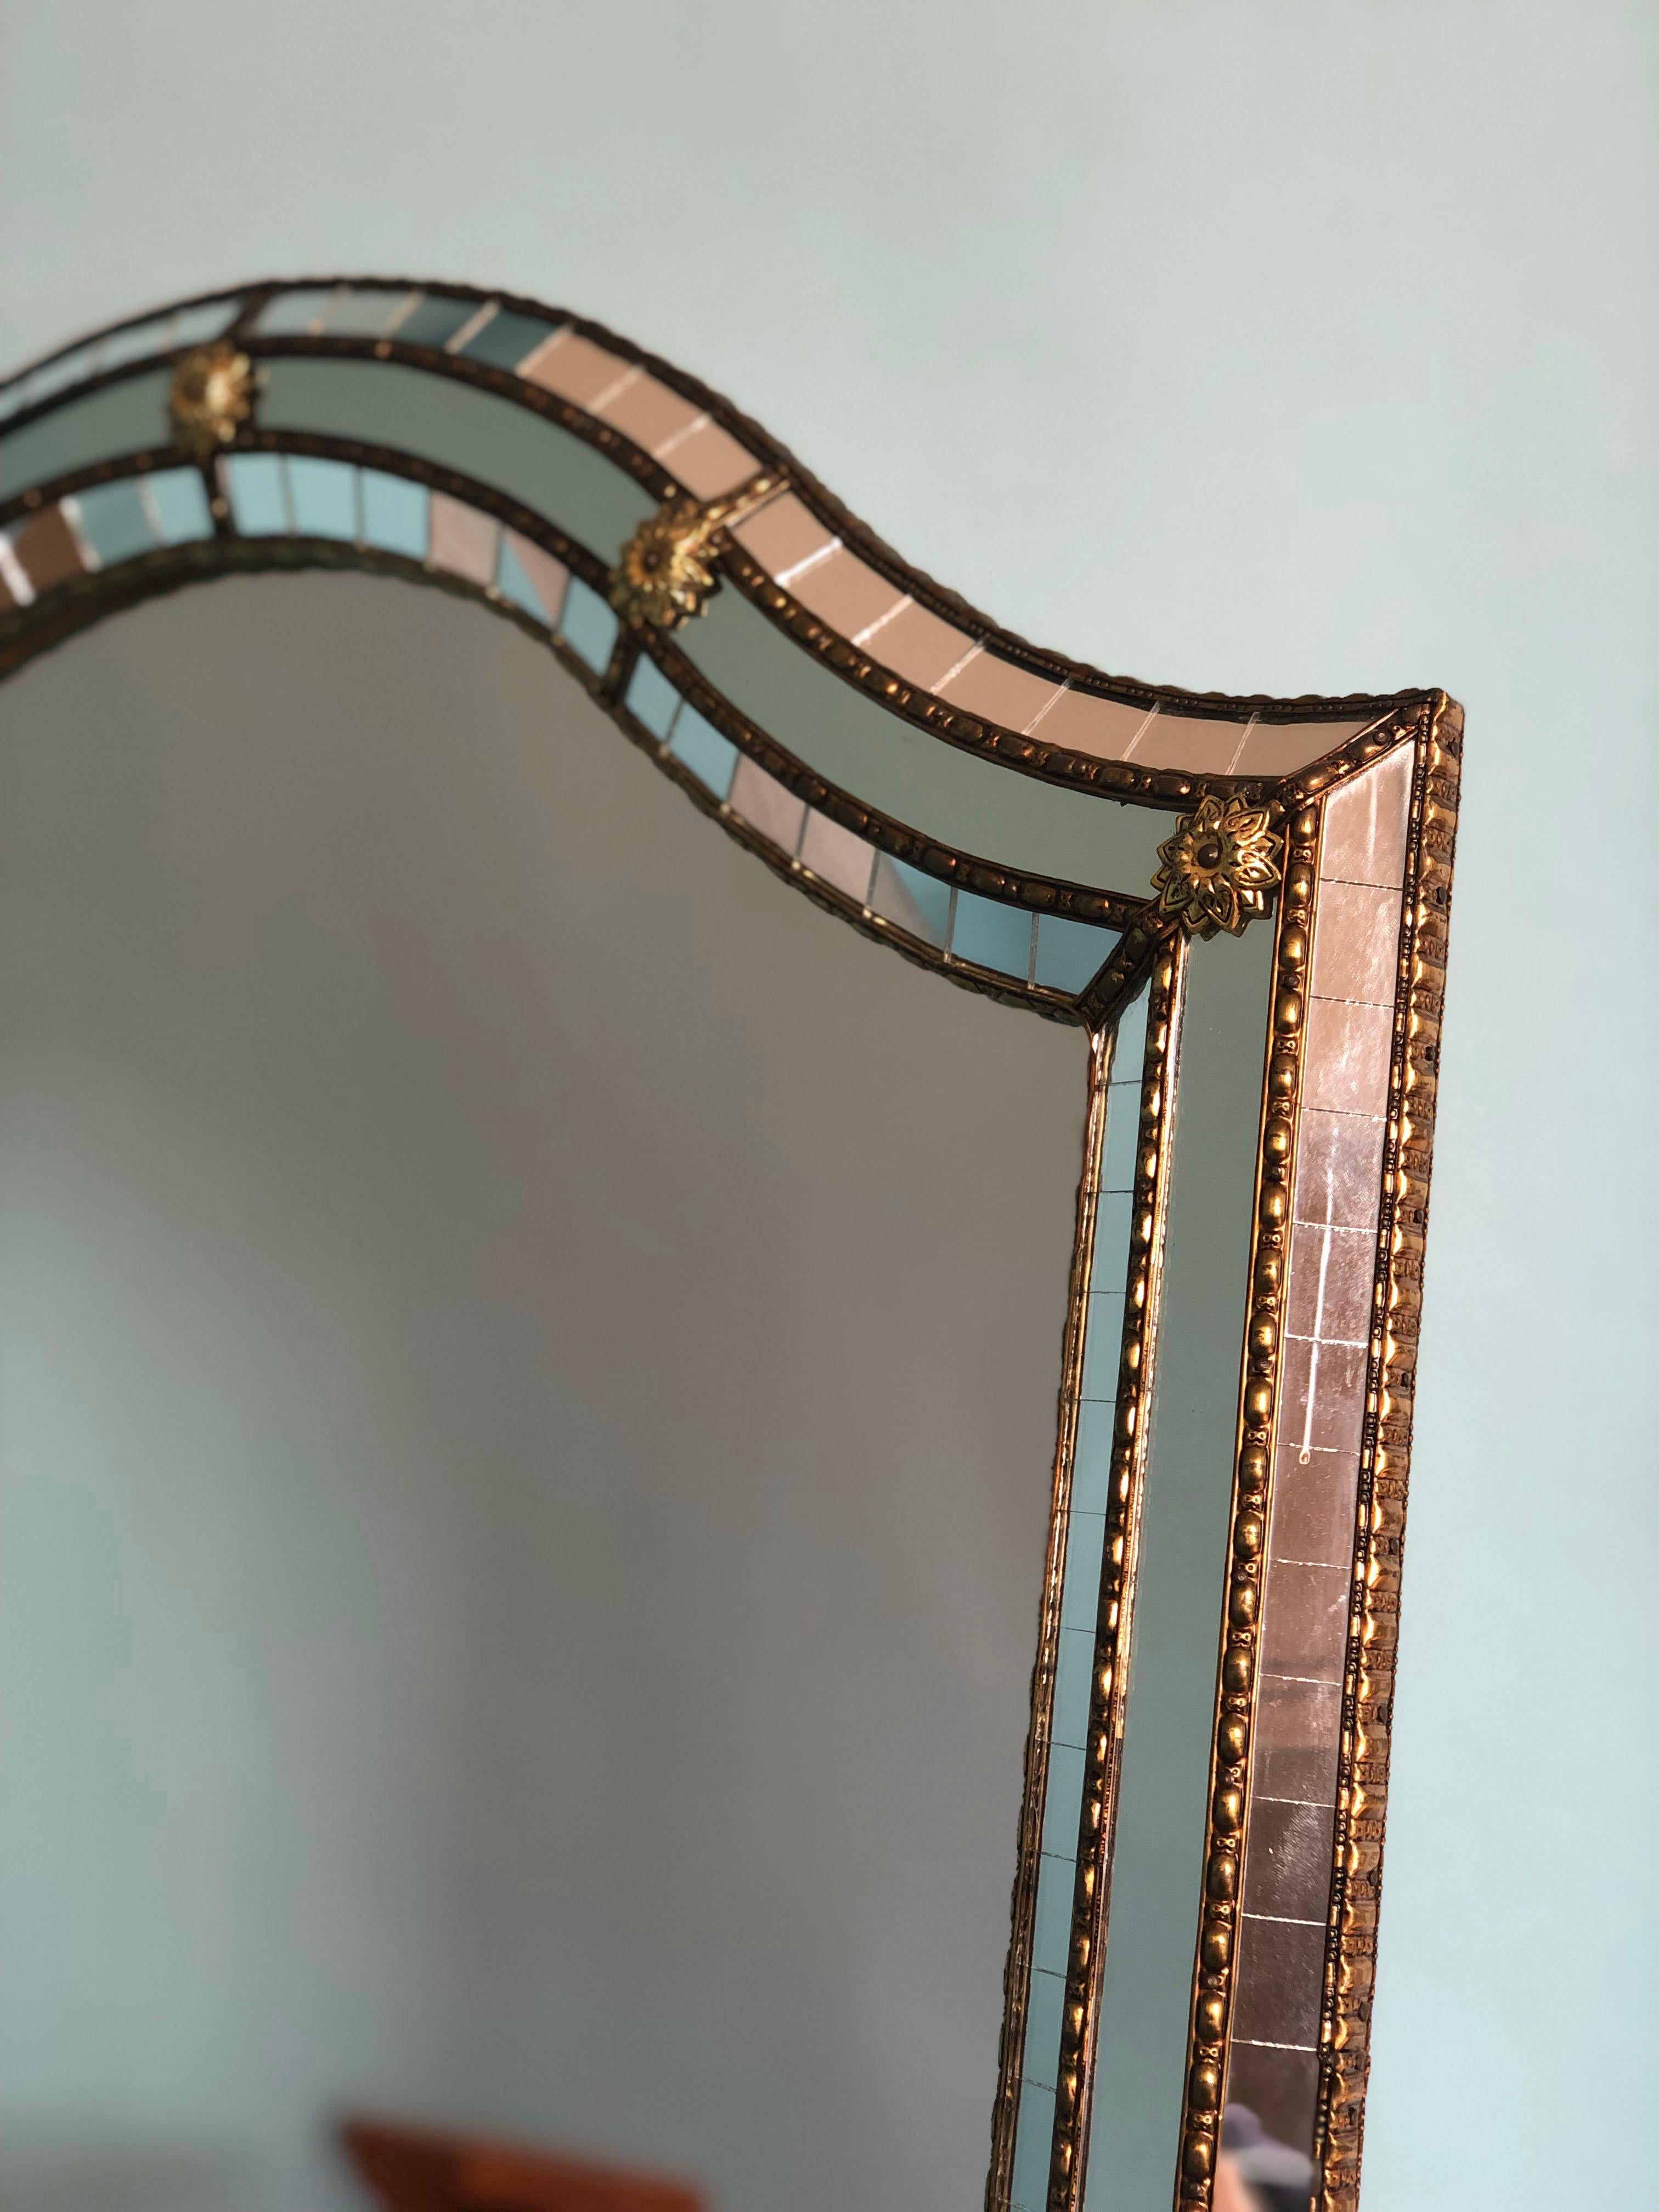 Beautiful Spanish mirror with a Venetian glass frame with a brass golden strip. The frame is made with small crystals both on the outside and inside, and larger ones in the center line. The brass strip holds the mirrors together.

Handmade mirror In